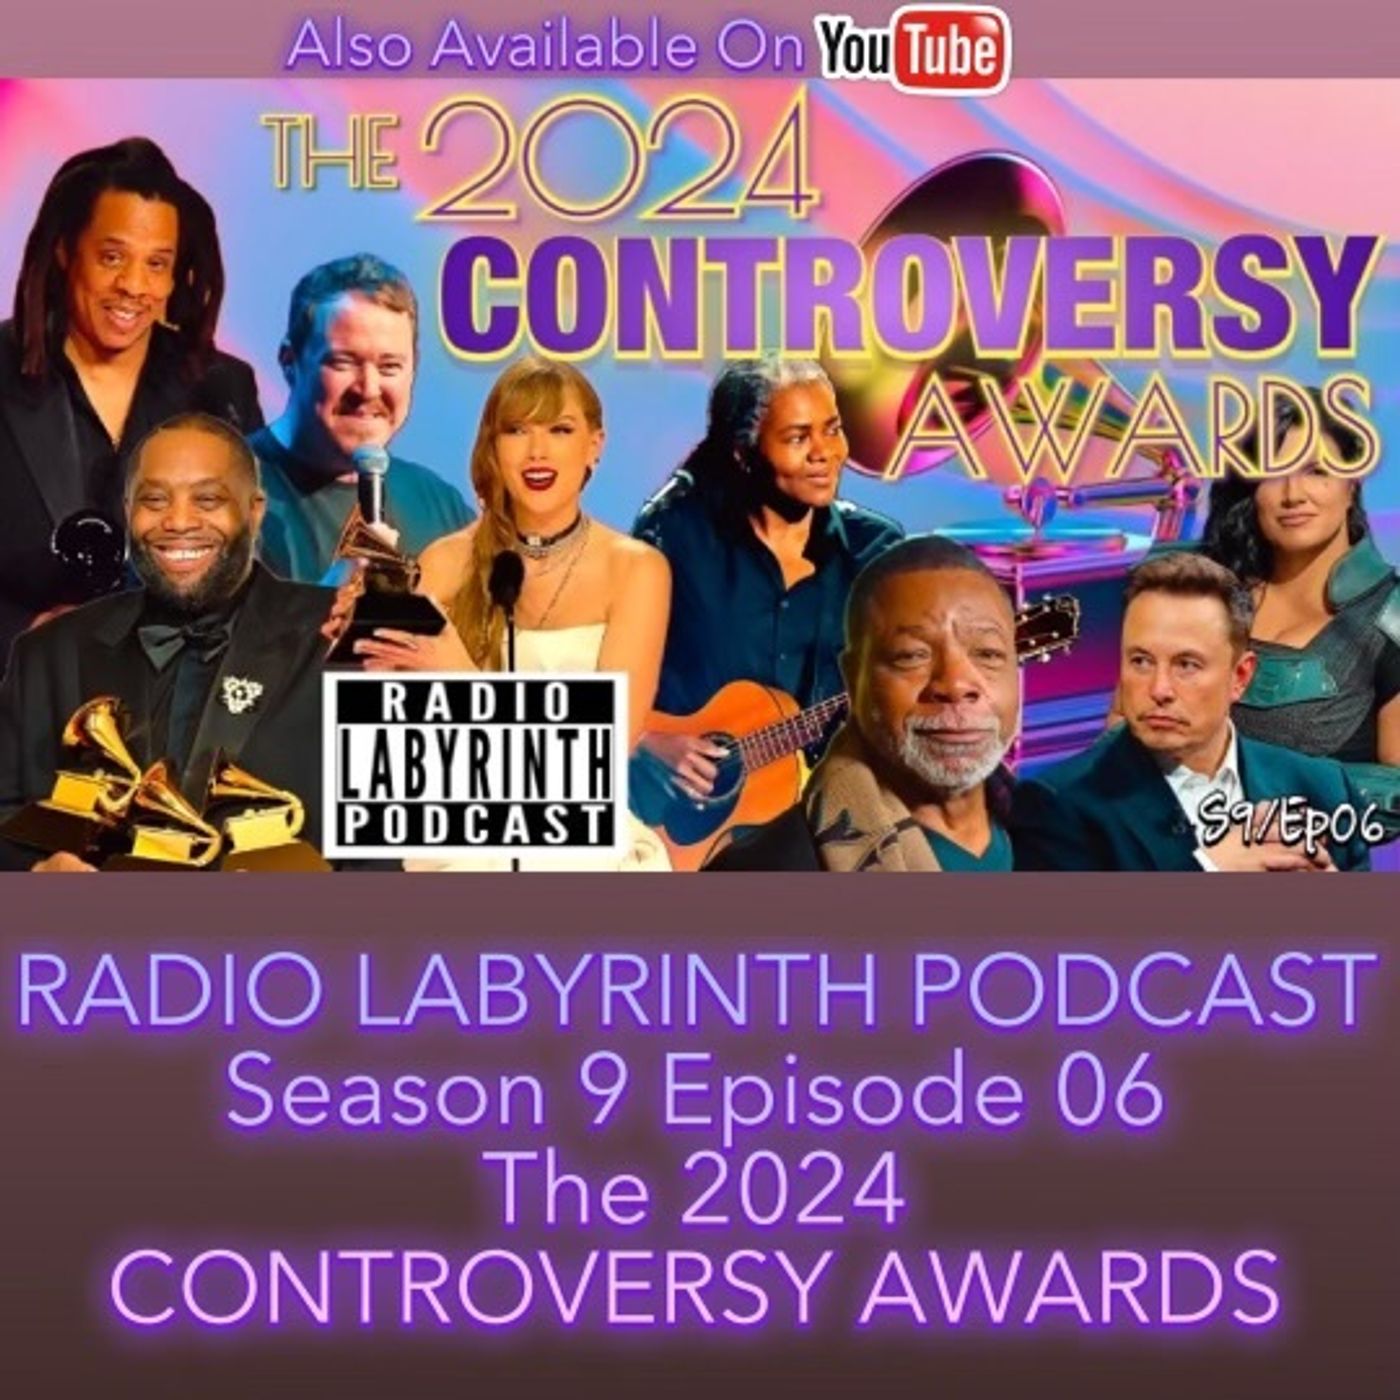 S9 Ep6: THE 2024 CONTROVERSY AWARDS